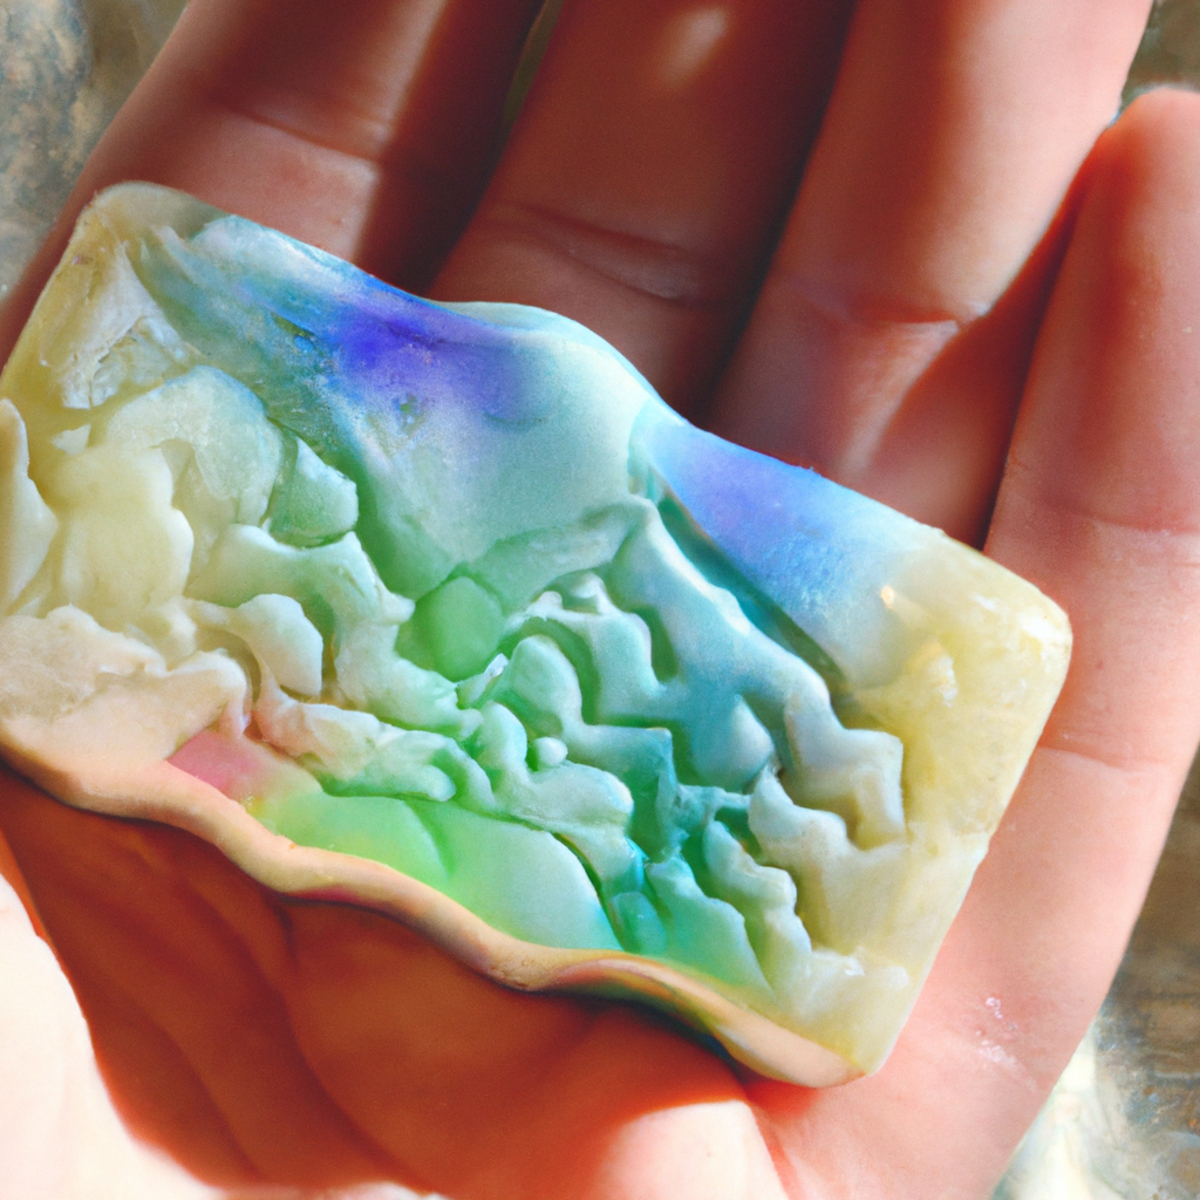 Close-up of hand holding vibrant, mythical soap with intricate patterns, emphasizing skincare for Harlequin Ichthyosis.